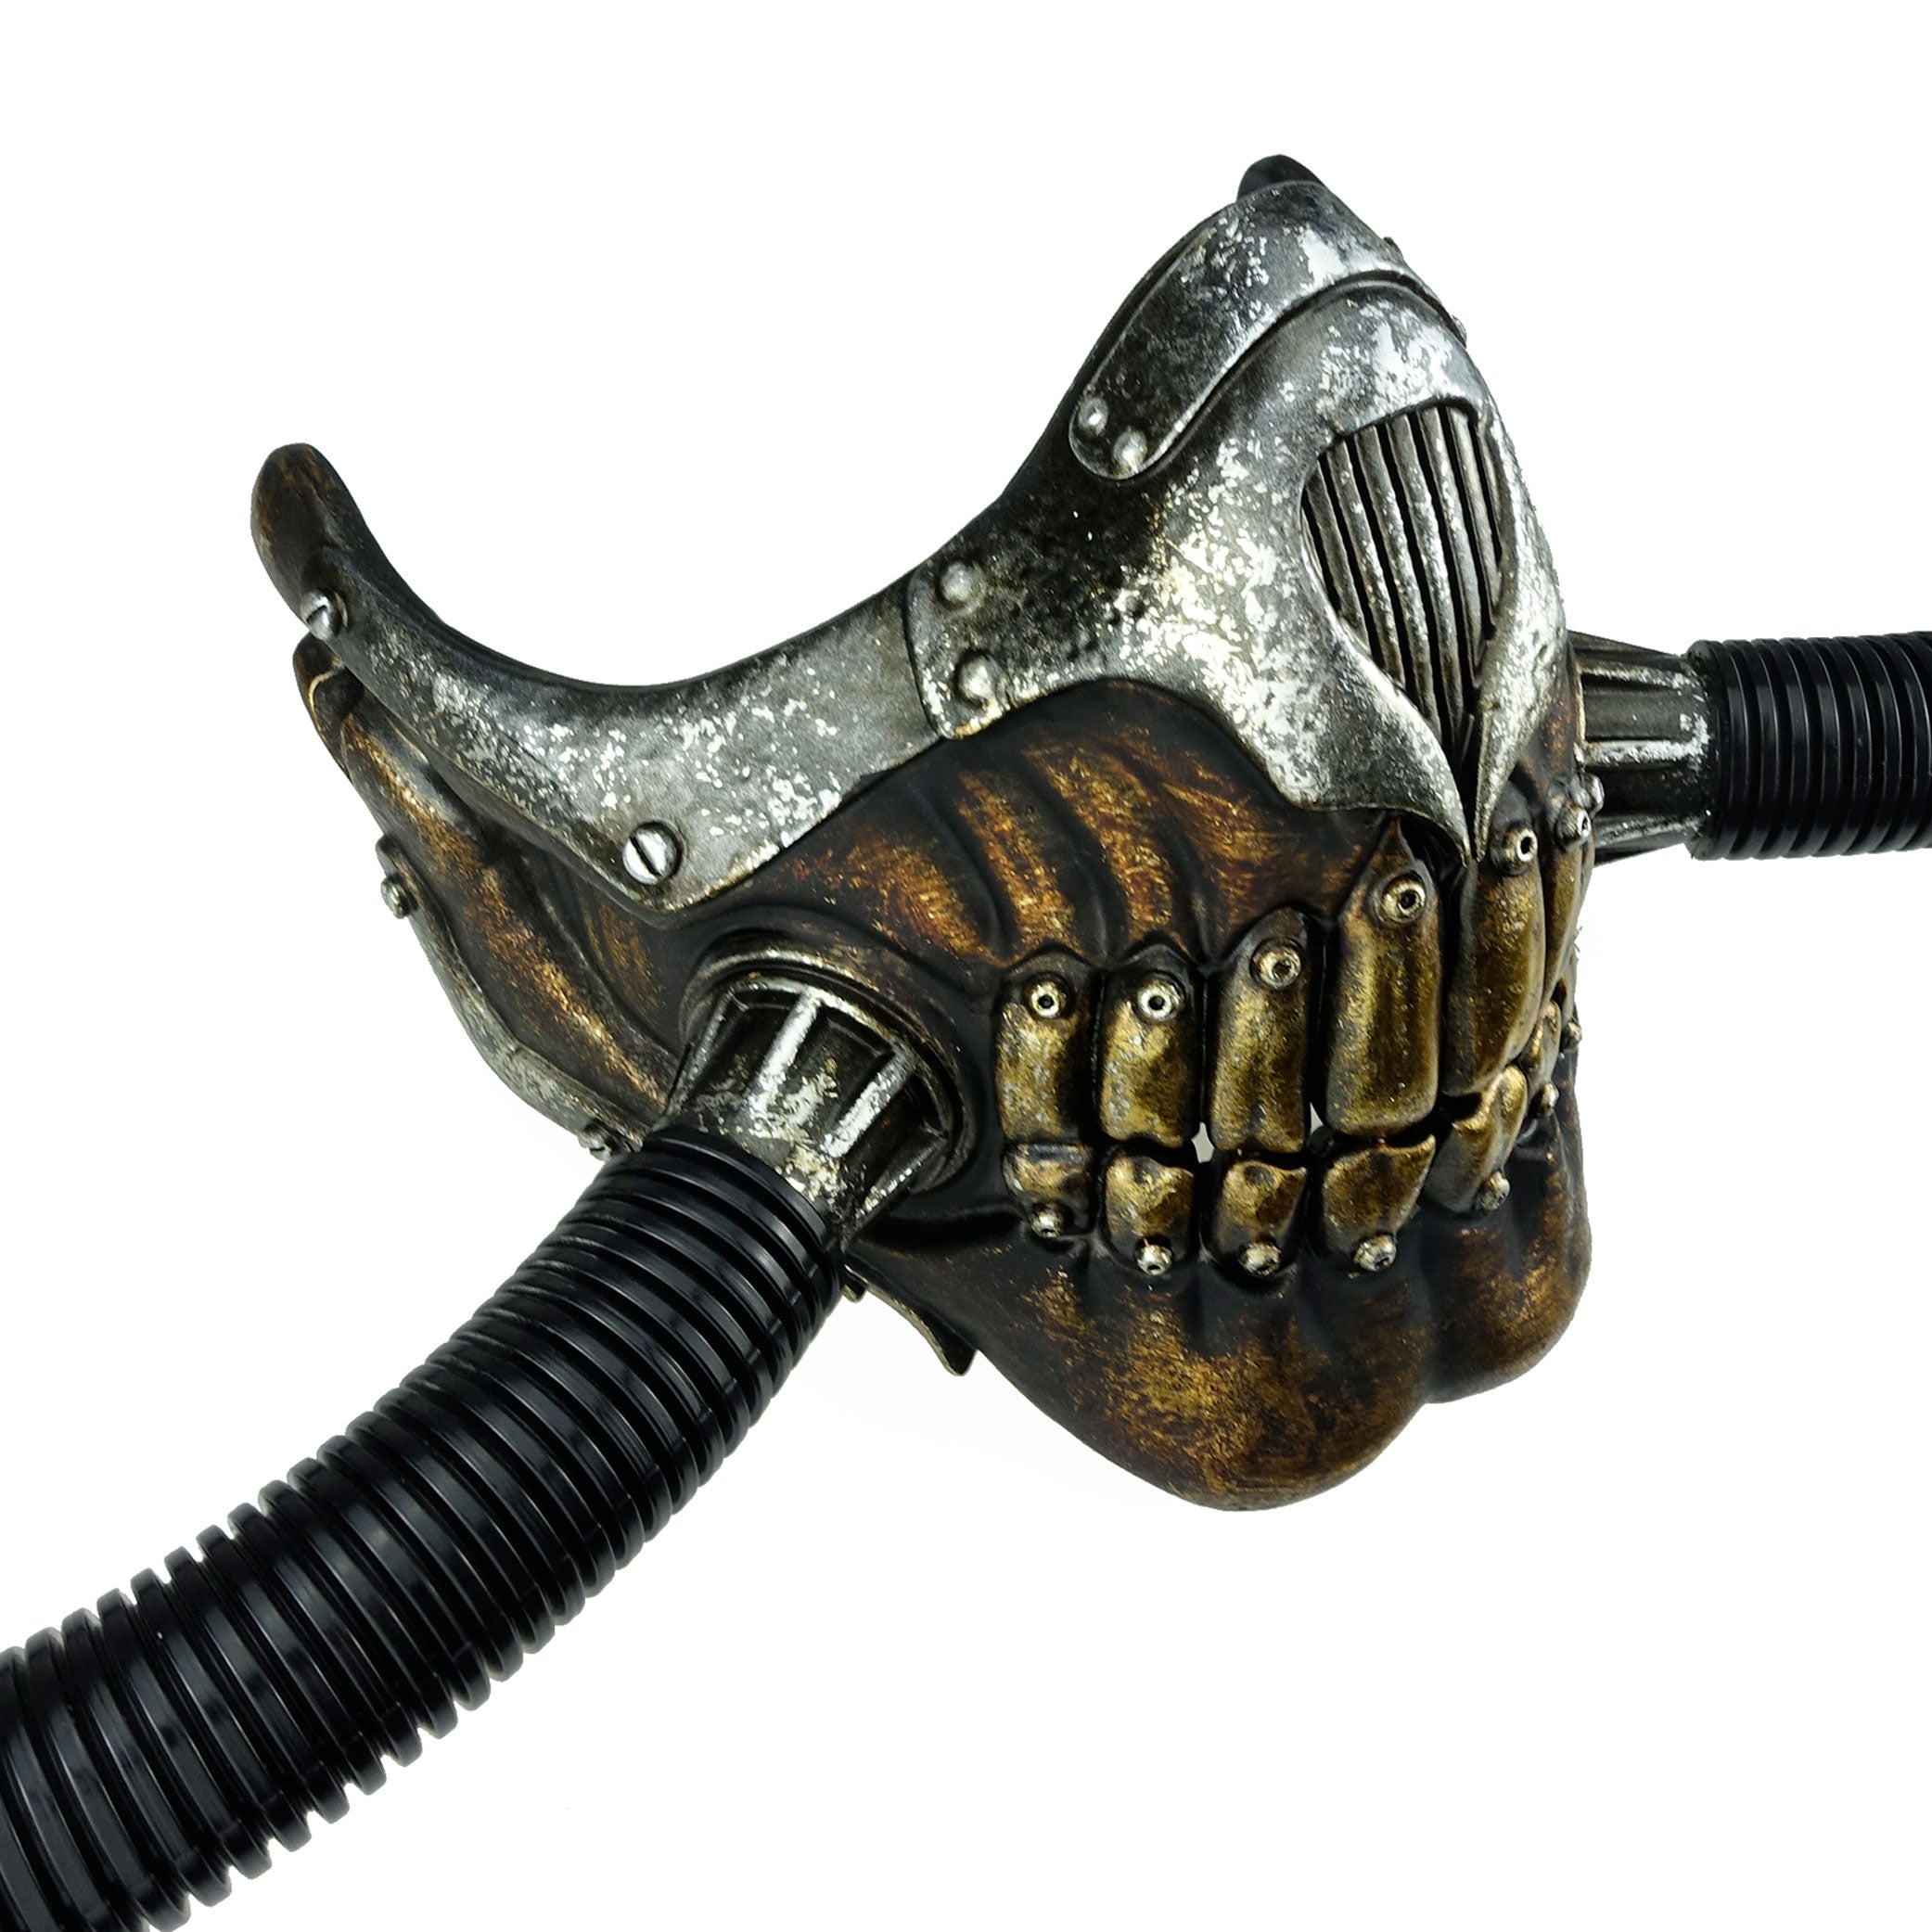 Mad Max Mask with Tube Half Face Mask Latest Adult Halloween Cosplay Costume Accessory Prop